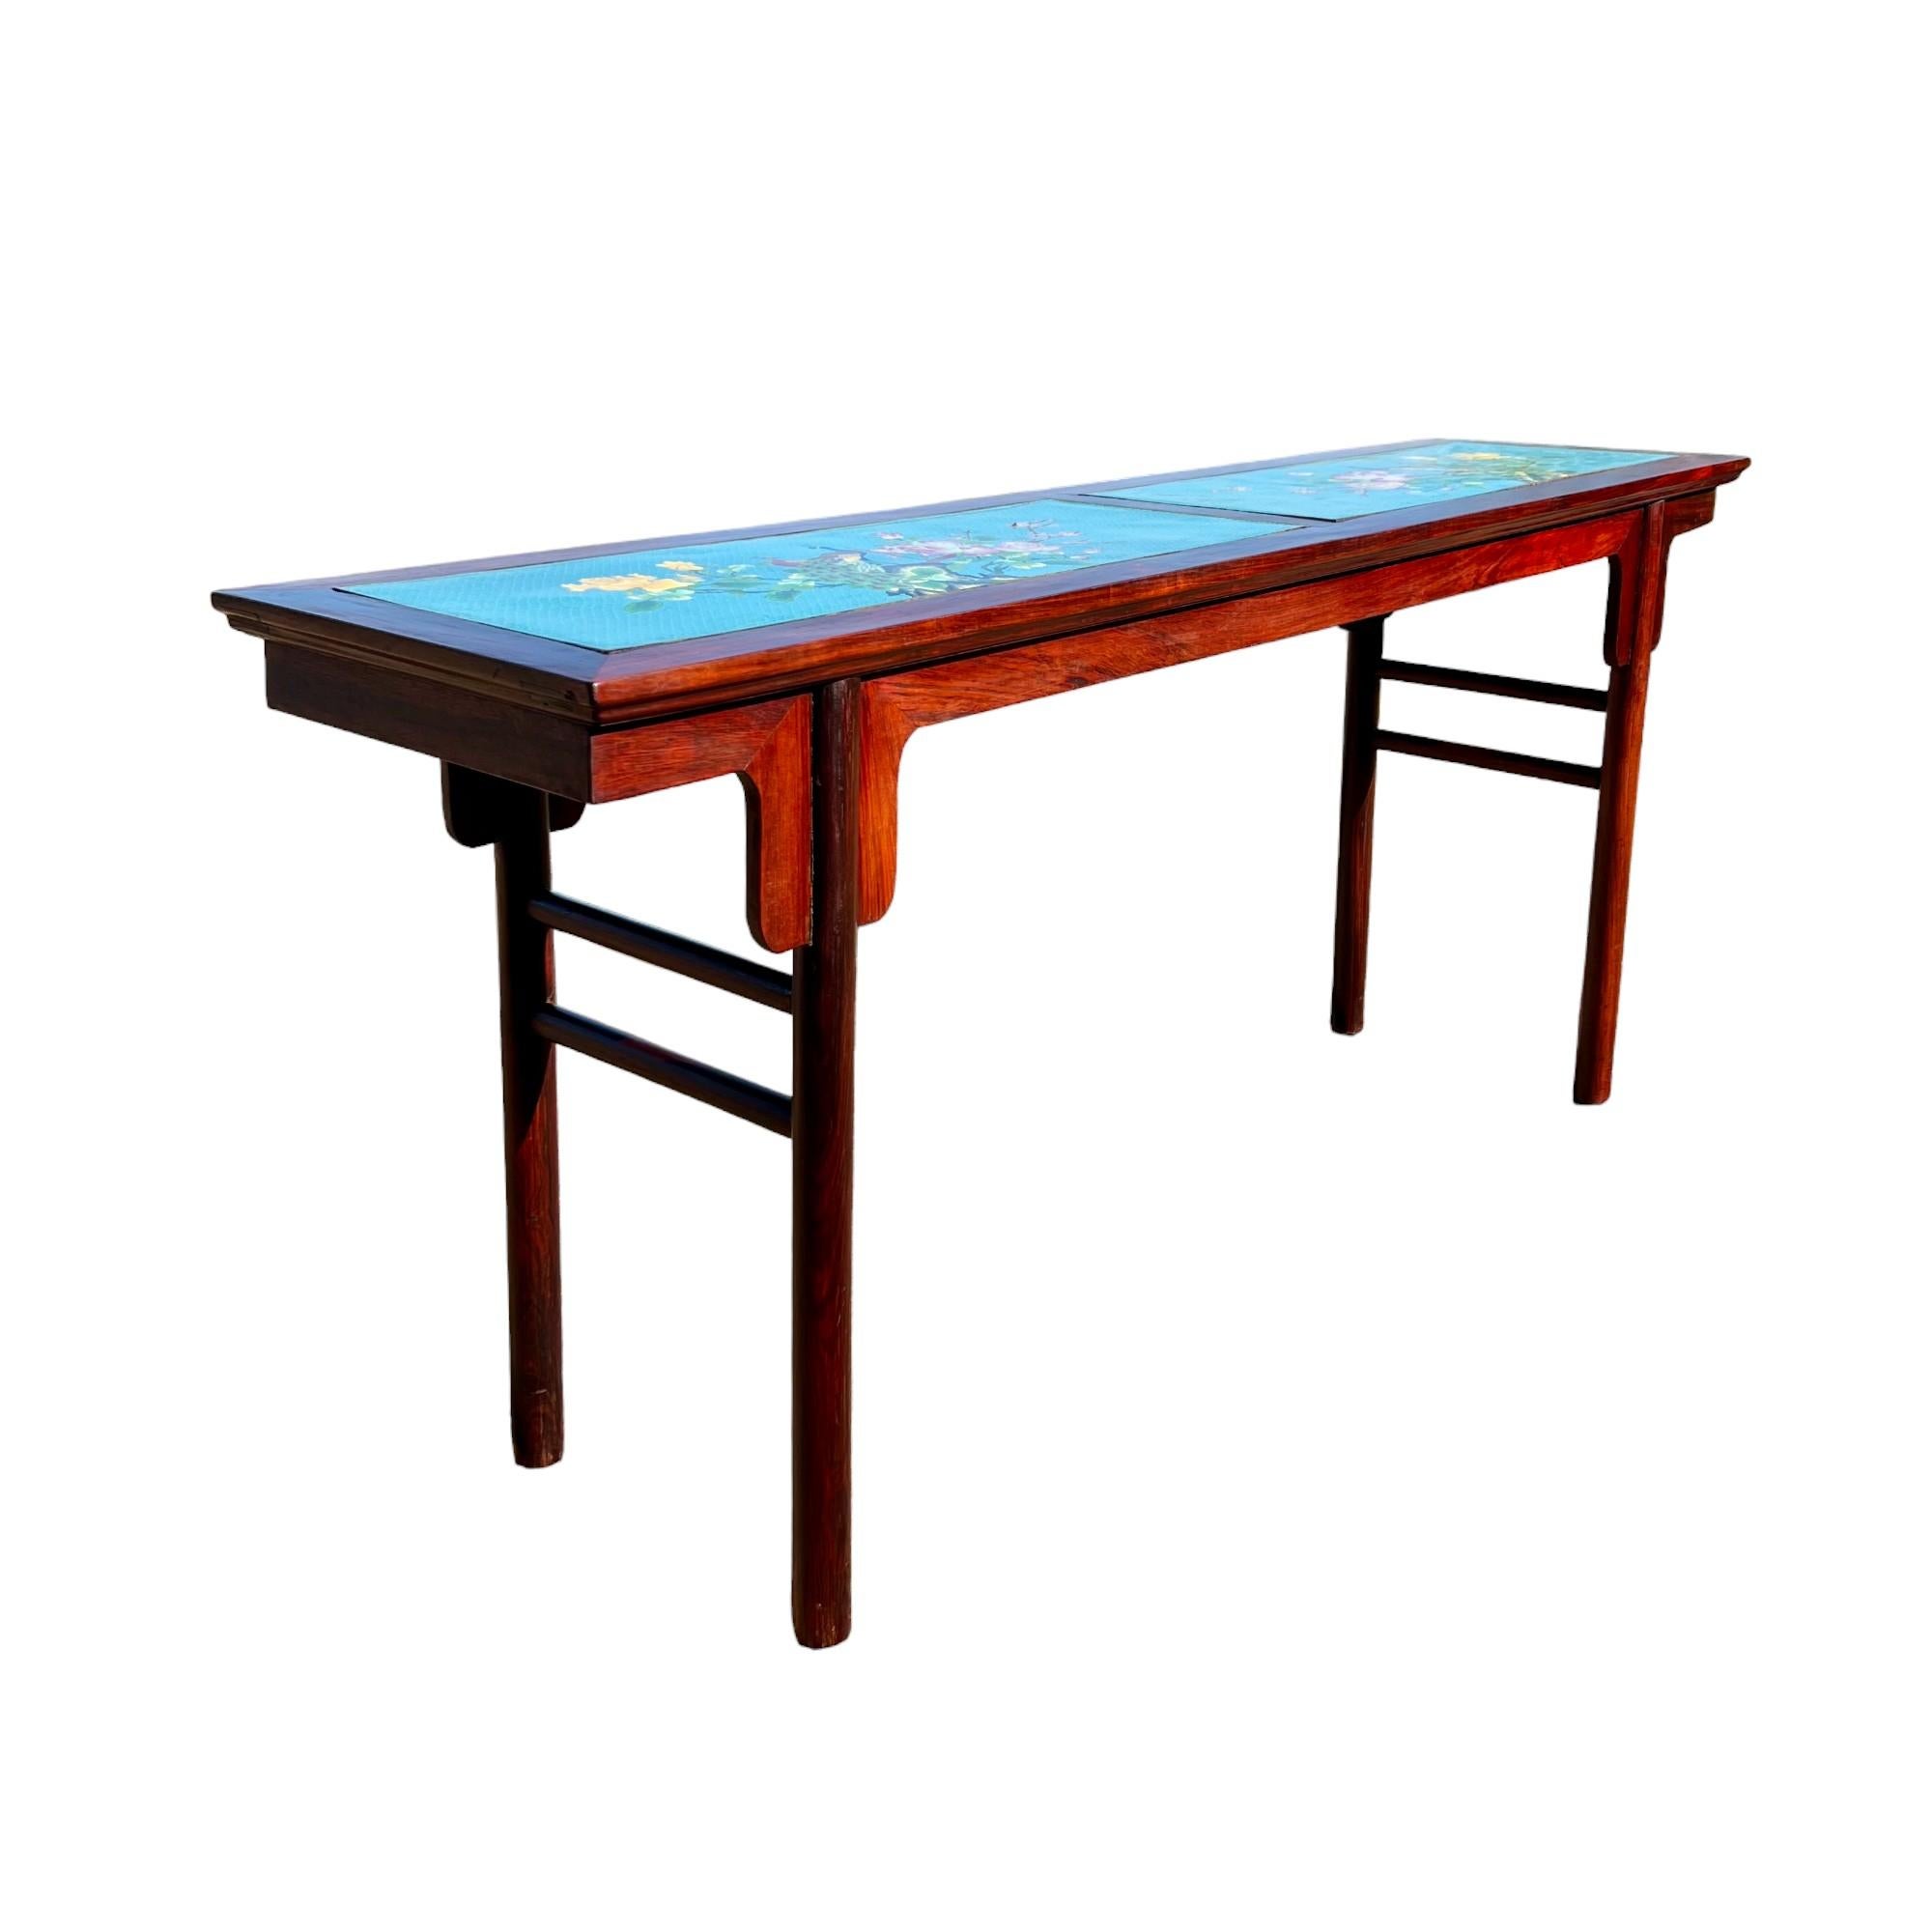 An exquisite antique Chinese Qing dynasty hardwood offering table with cloisonné top, circa late 19th to early 20th century. The modern form of the rosewood frame features a decorative carved apron and cylindrical post legs connected on side ends by